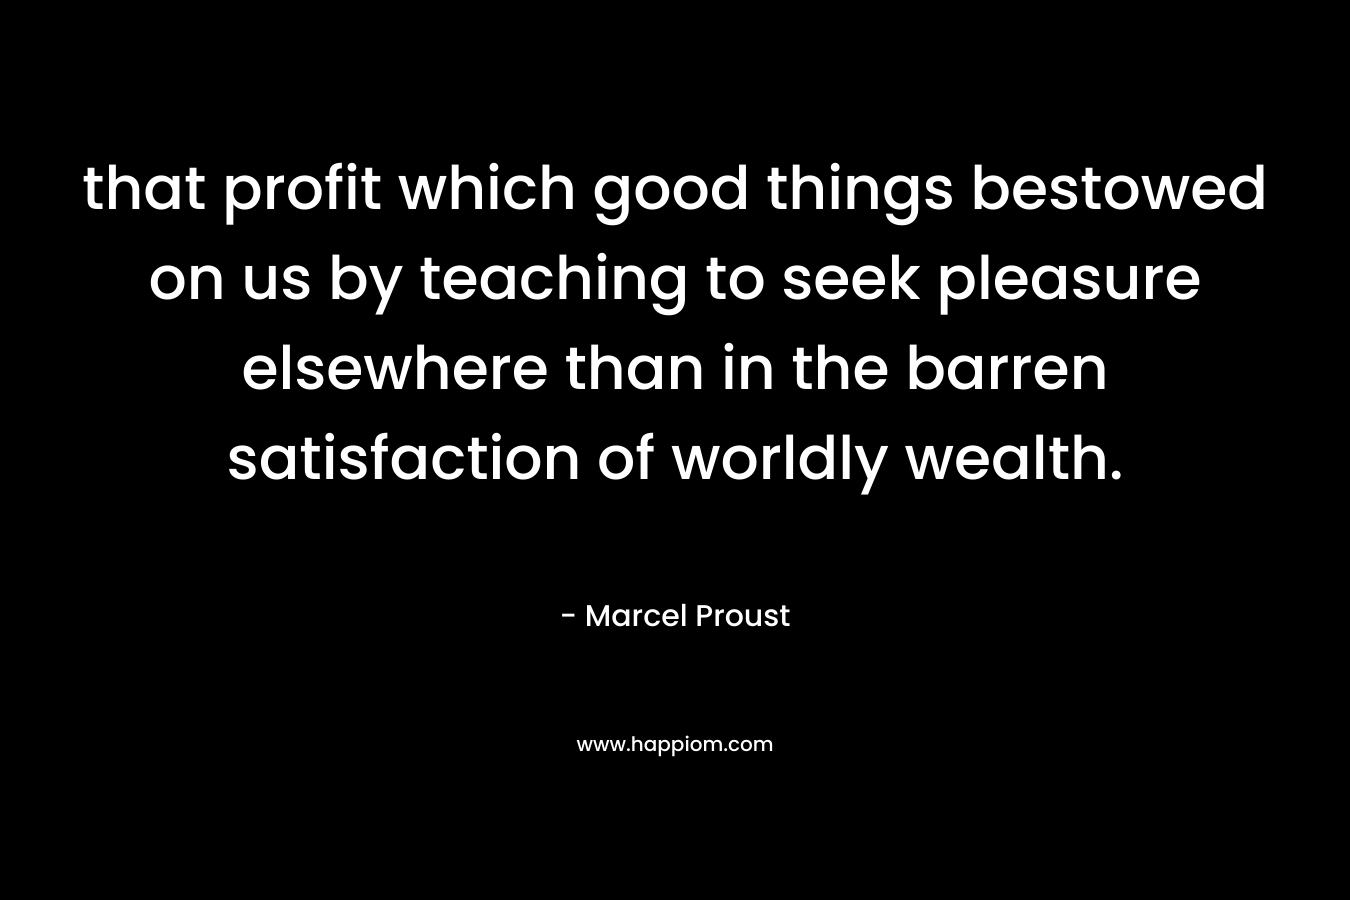 that profit which good things bestowed on us by teaching to seek pleasure elsewhere than in the barren satisfaction of worldly wealth. – Marcel Proust